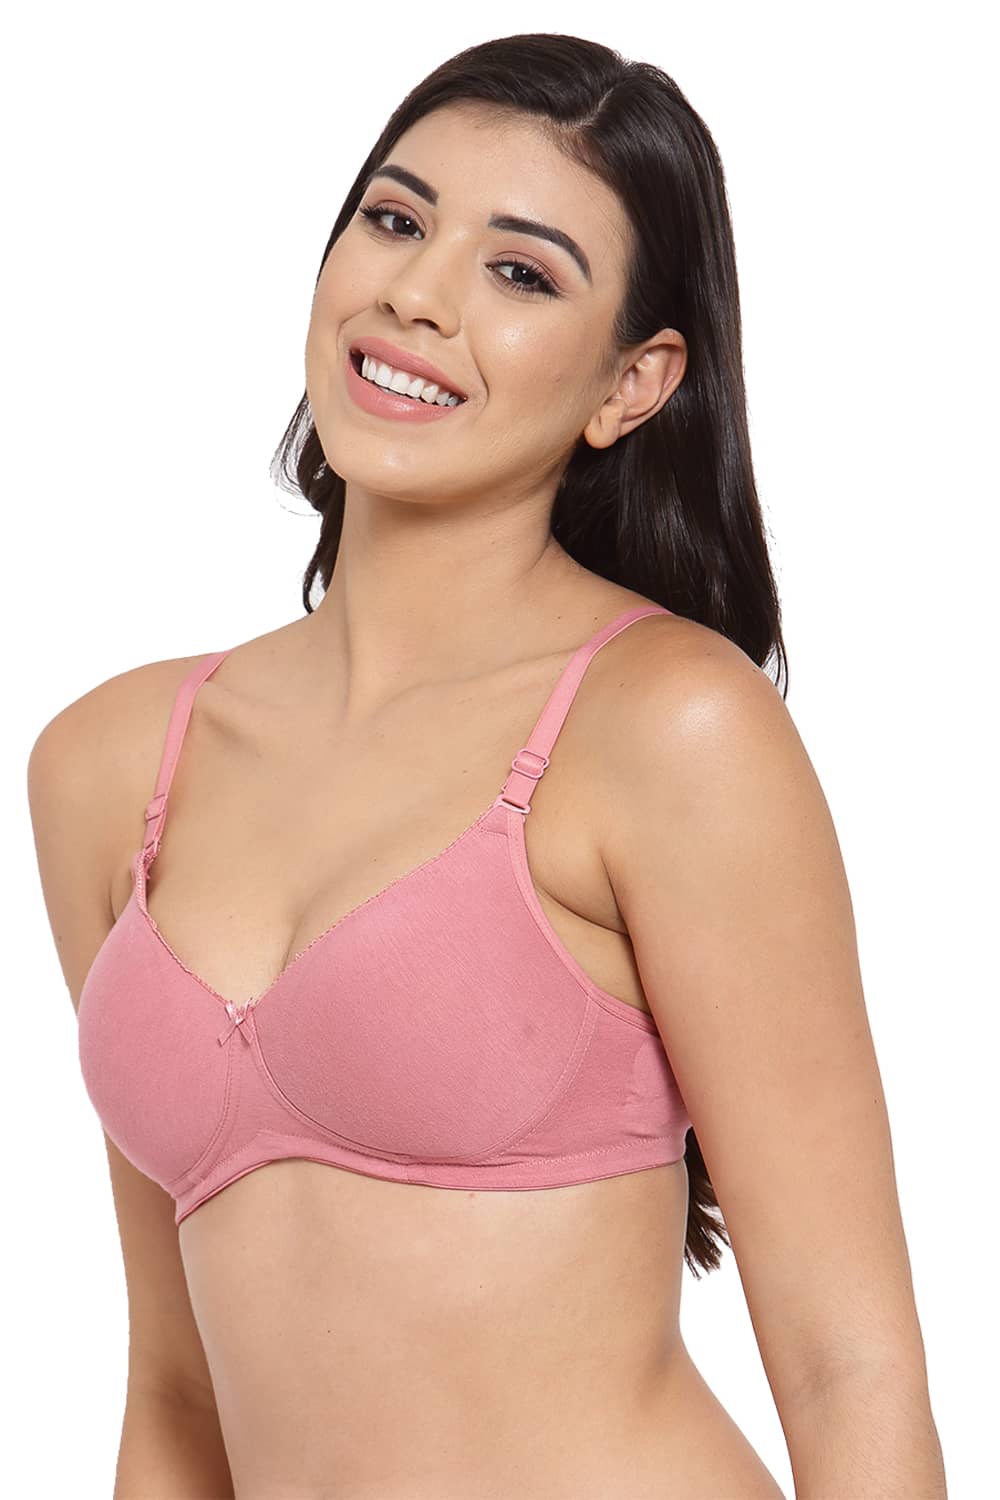 Buy online Pink Cotton Tshirt Bra from lingerie for Women by